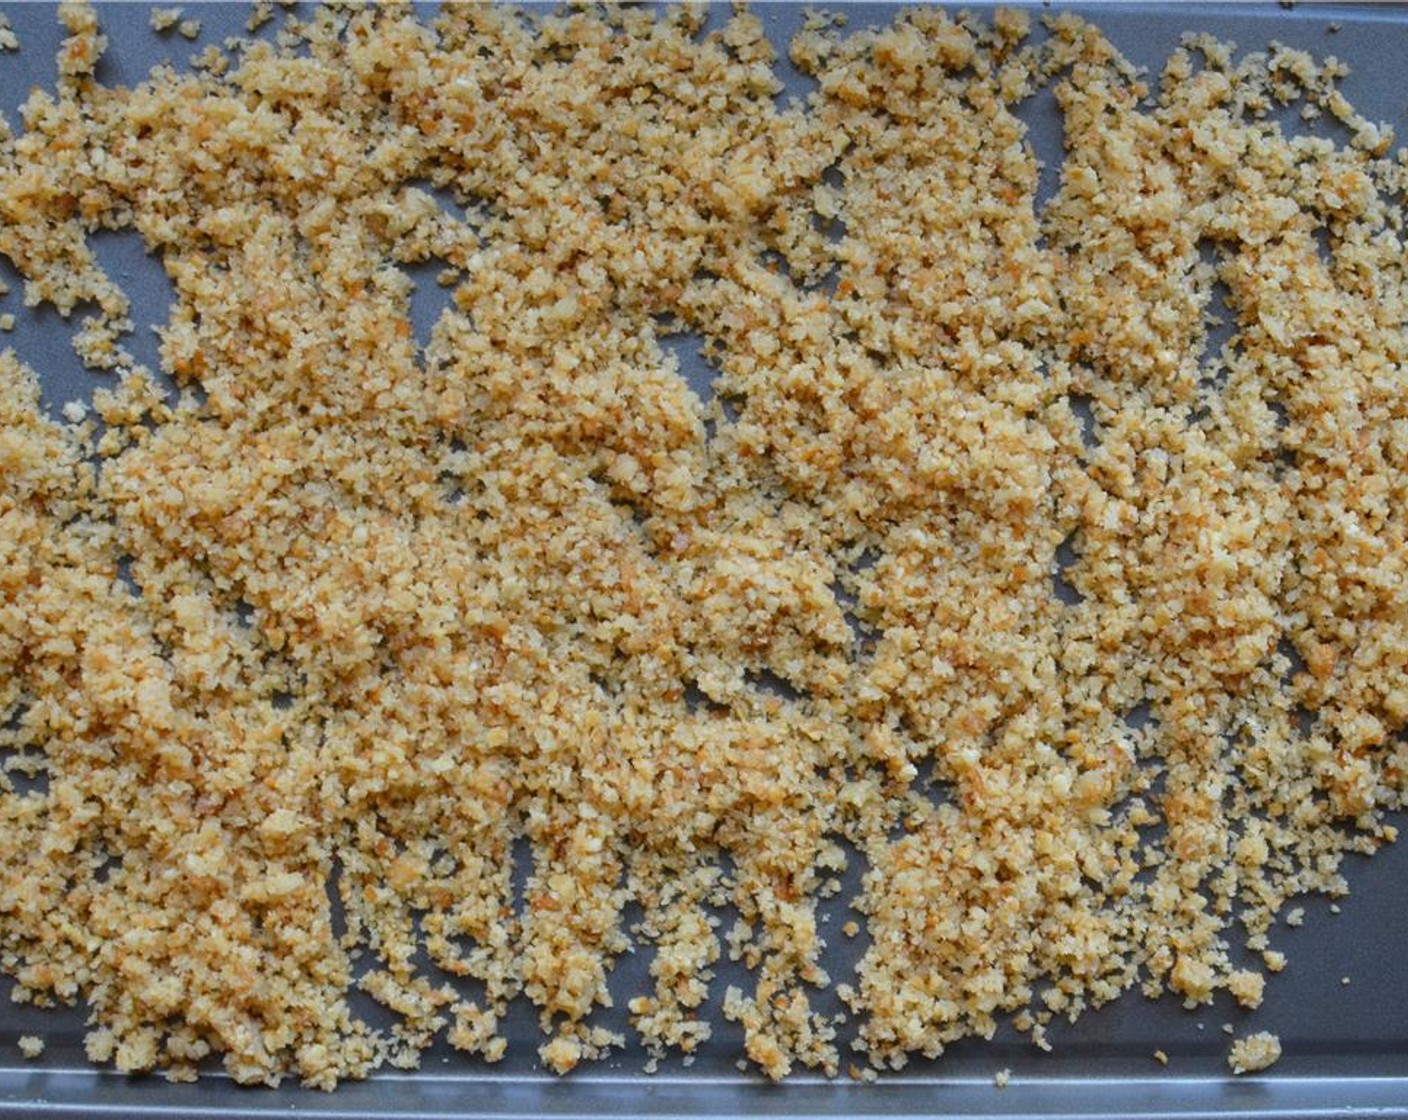 step 4 Scatter the crumbs on a cookie sheet and pop into the preheated oven for about 3 to 5 minutes. Keep a close eye on those crumbs and stir them around, you want them lightly toasted not browned or burned! Then transfer the crumbs to a shallow dish.